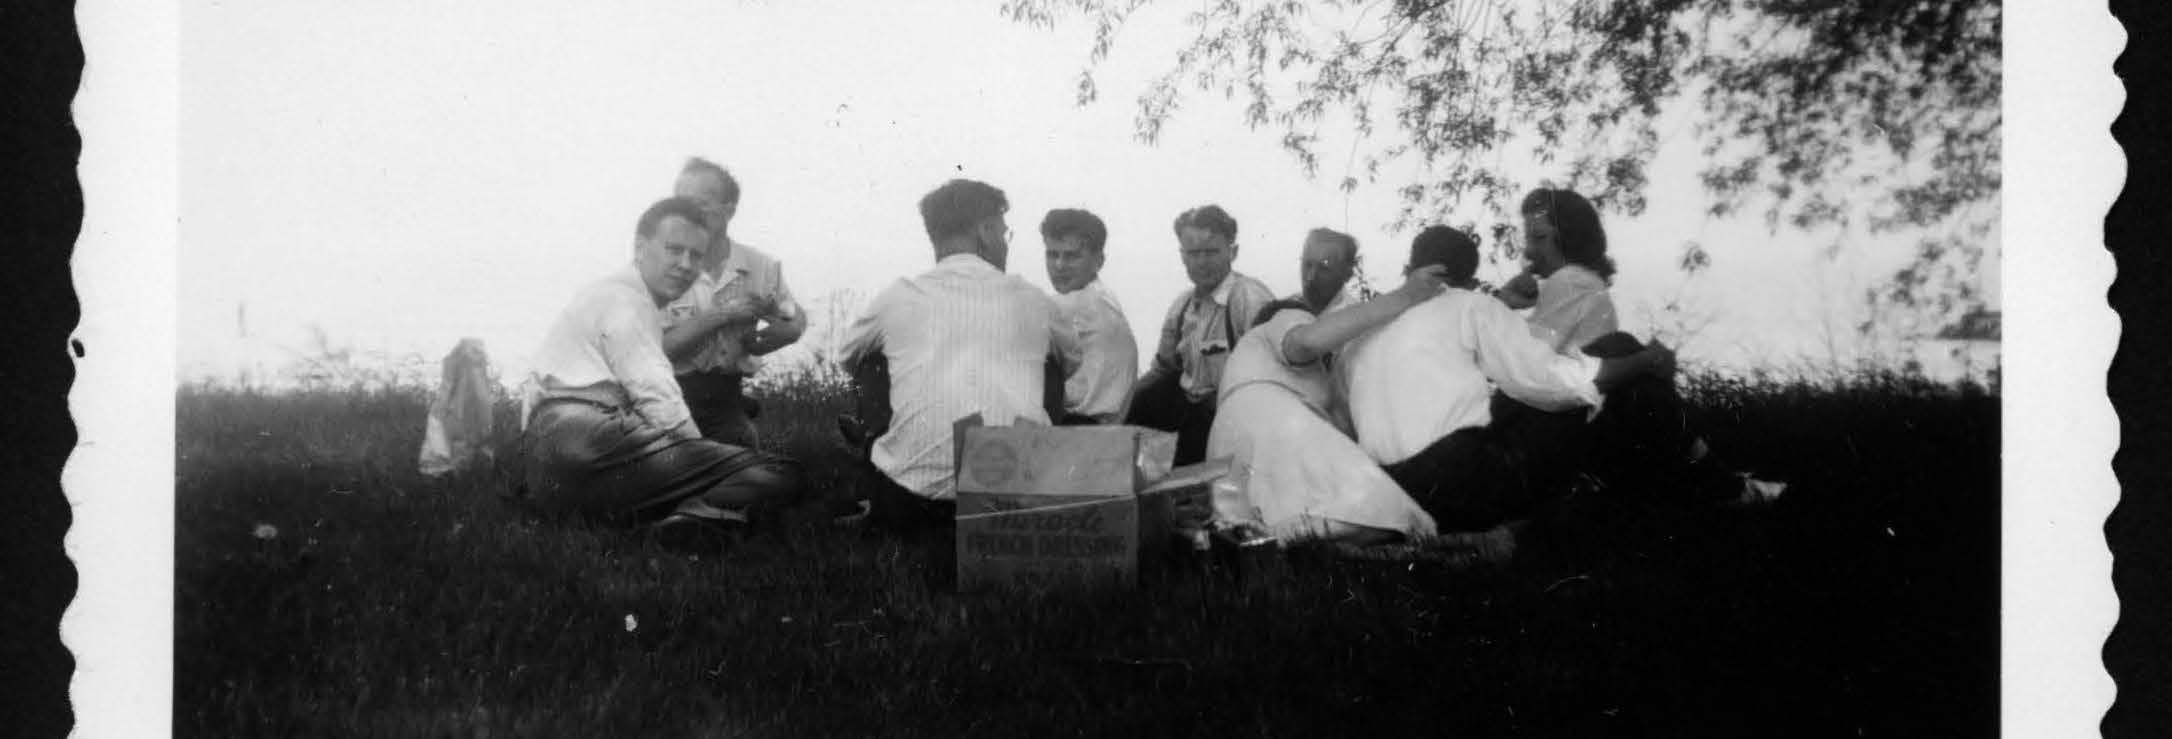 Dana students enjoy a picnic, on tour in 1942